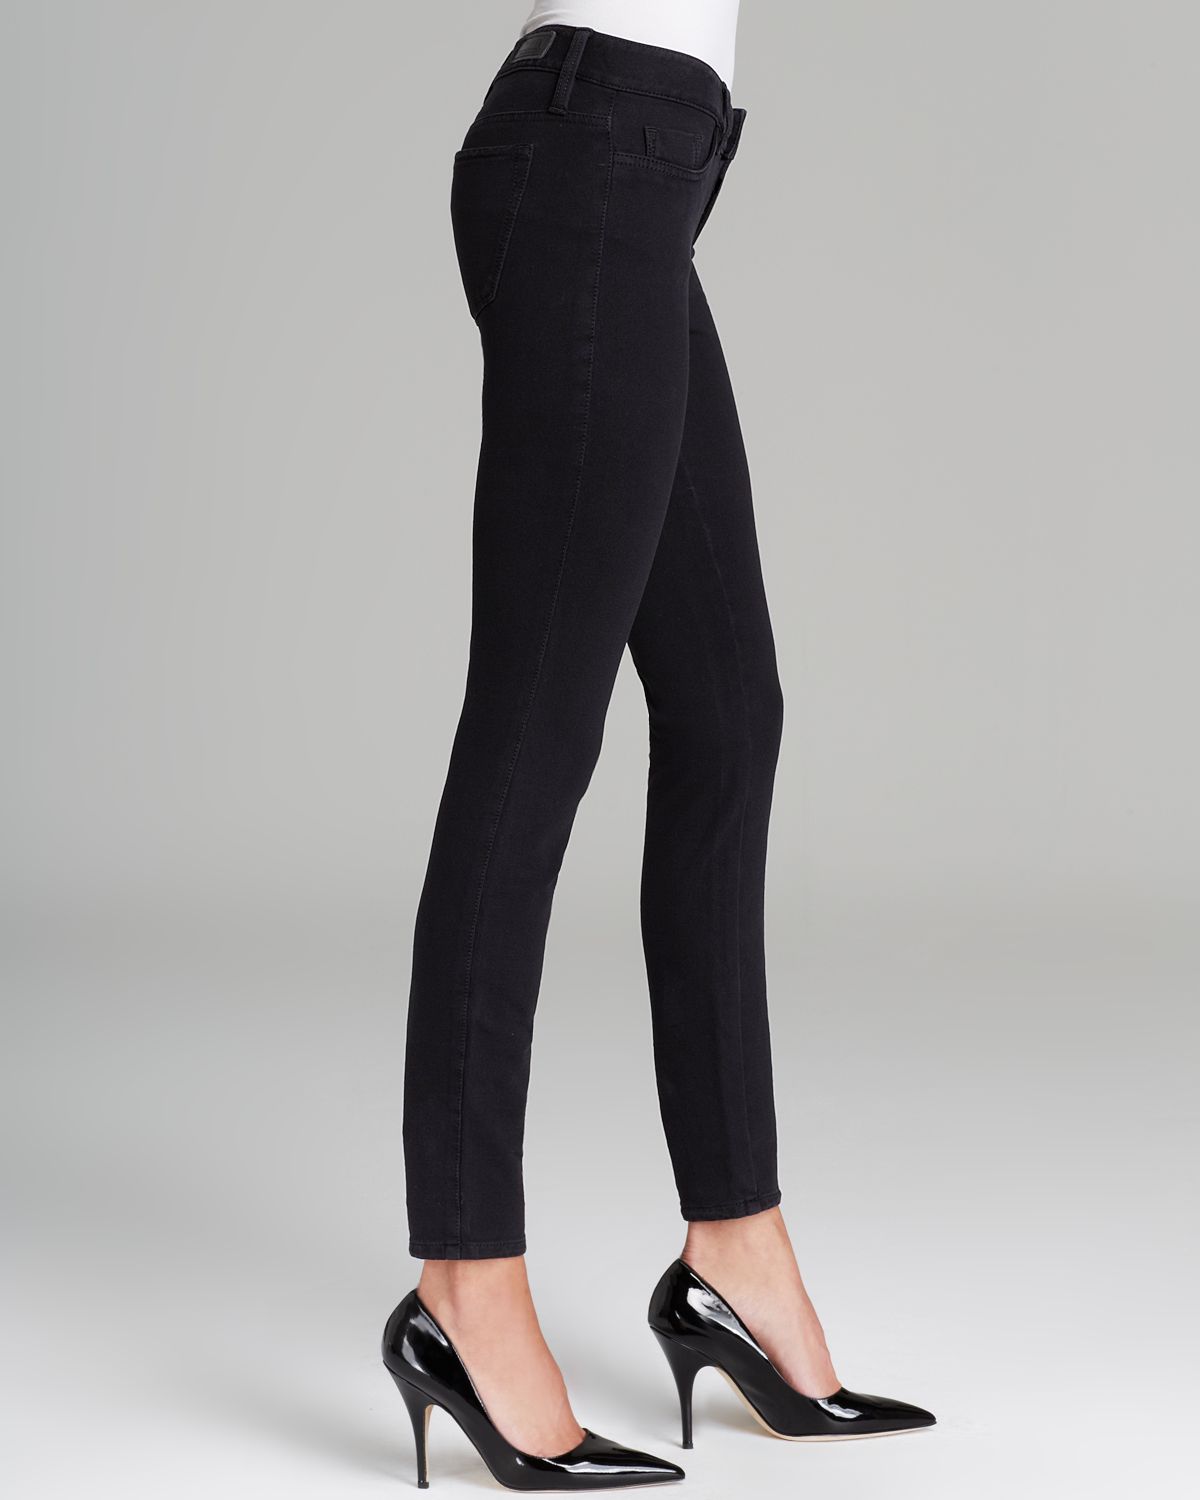 Lyst - Guess Jeans Brittney Legging in Black Silicone in Black